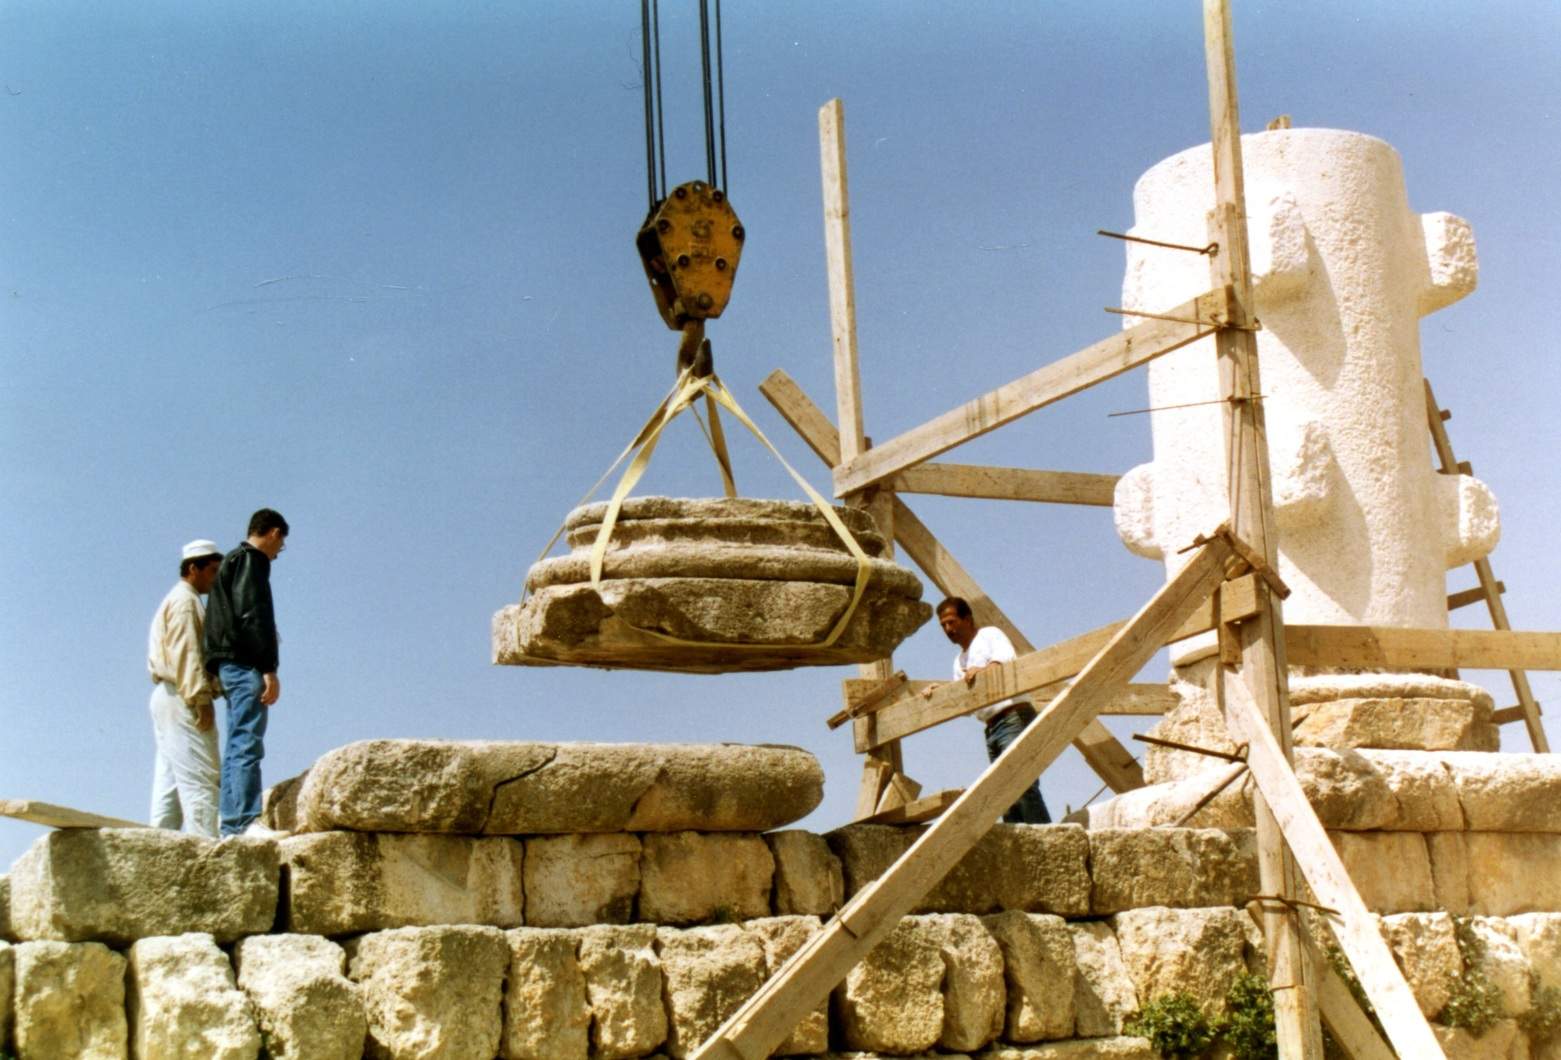 ACOR project members use a crane to raise one of the temple's monumental column bases into place. To the right is one of the four newly carved column drums that was needed to complete the reconstruction. Photo from ACOR Archive.